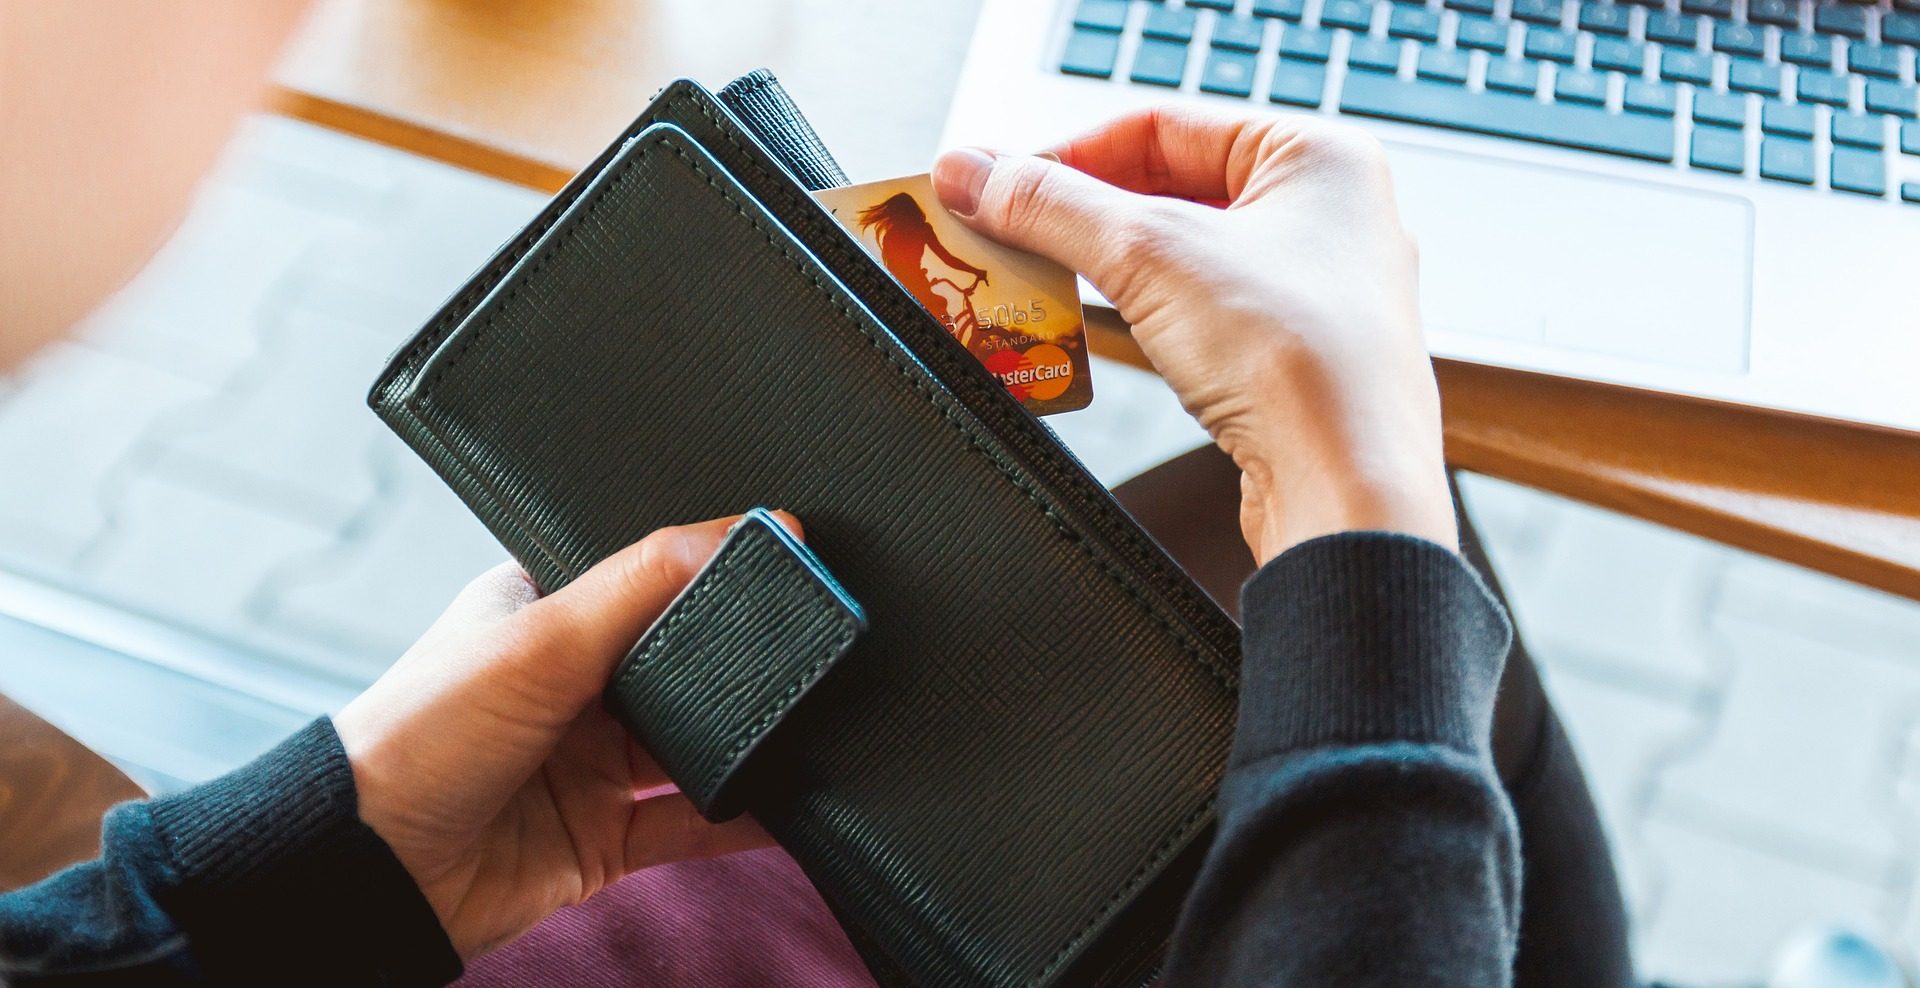 Why I Use a Credit Card for My Everyday Spending